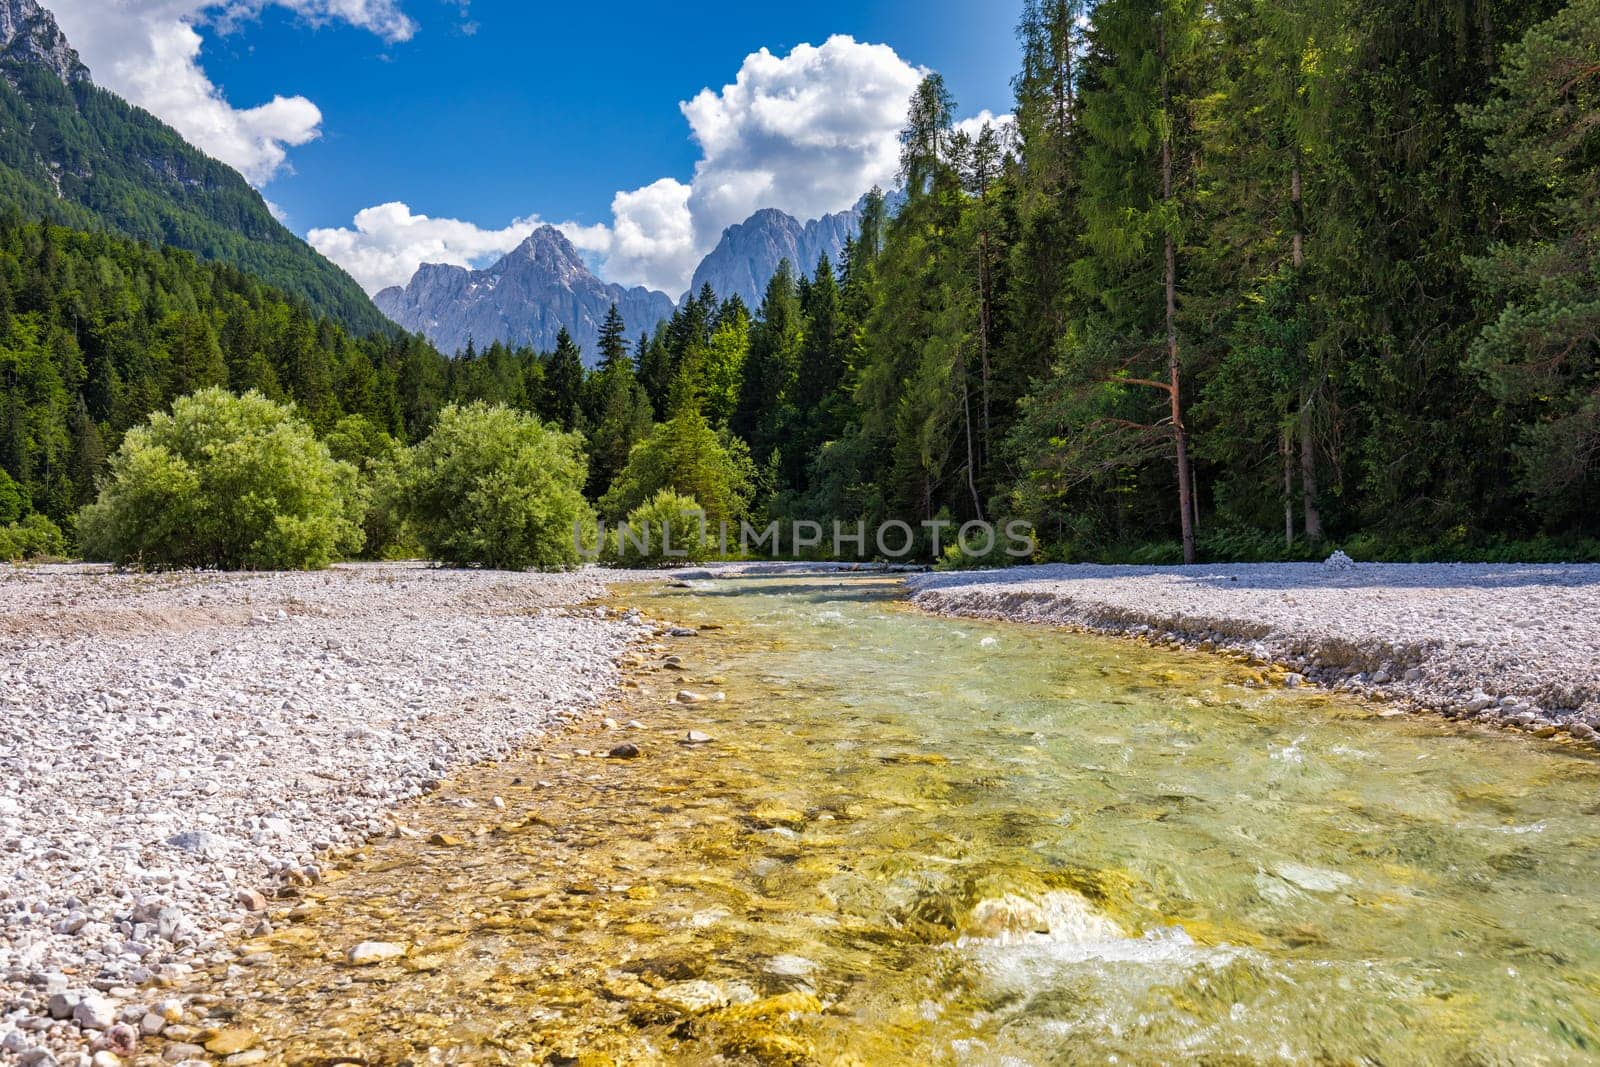 The Pisnica River in Kranjska Gora in the Upper Carniola region of north west Slovenia. It is a tributary of the Sava Dolinka River. Nature scenery in Triglav national park. Kranjska Gora, Slovenia by DaLiu